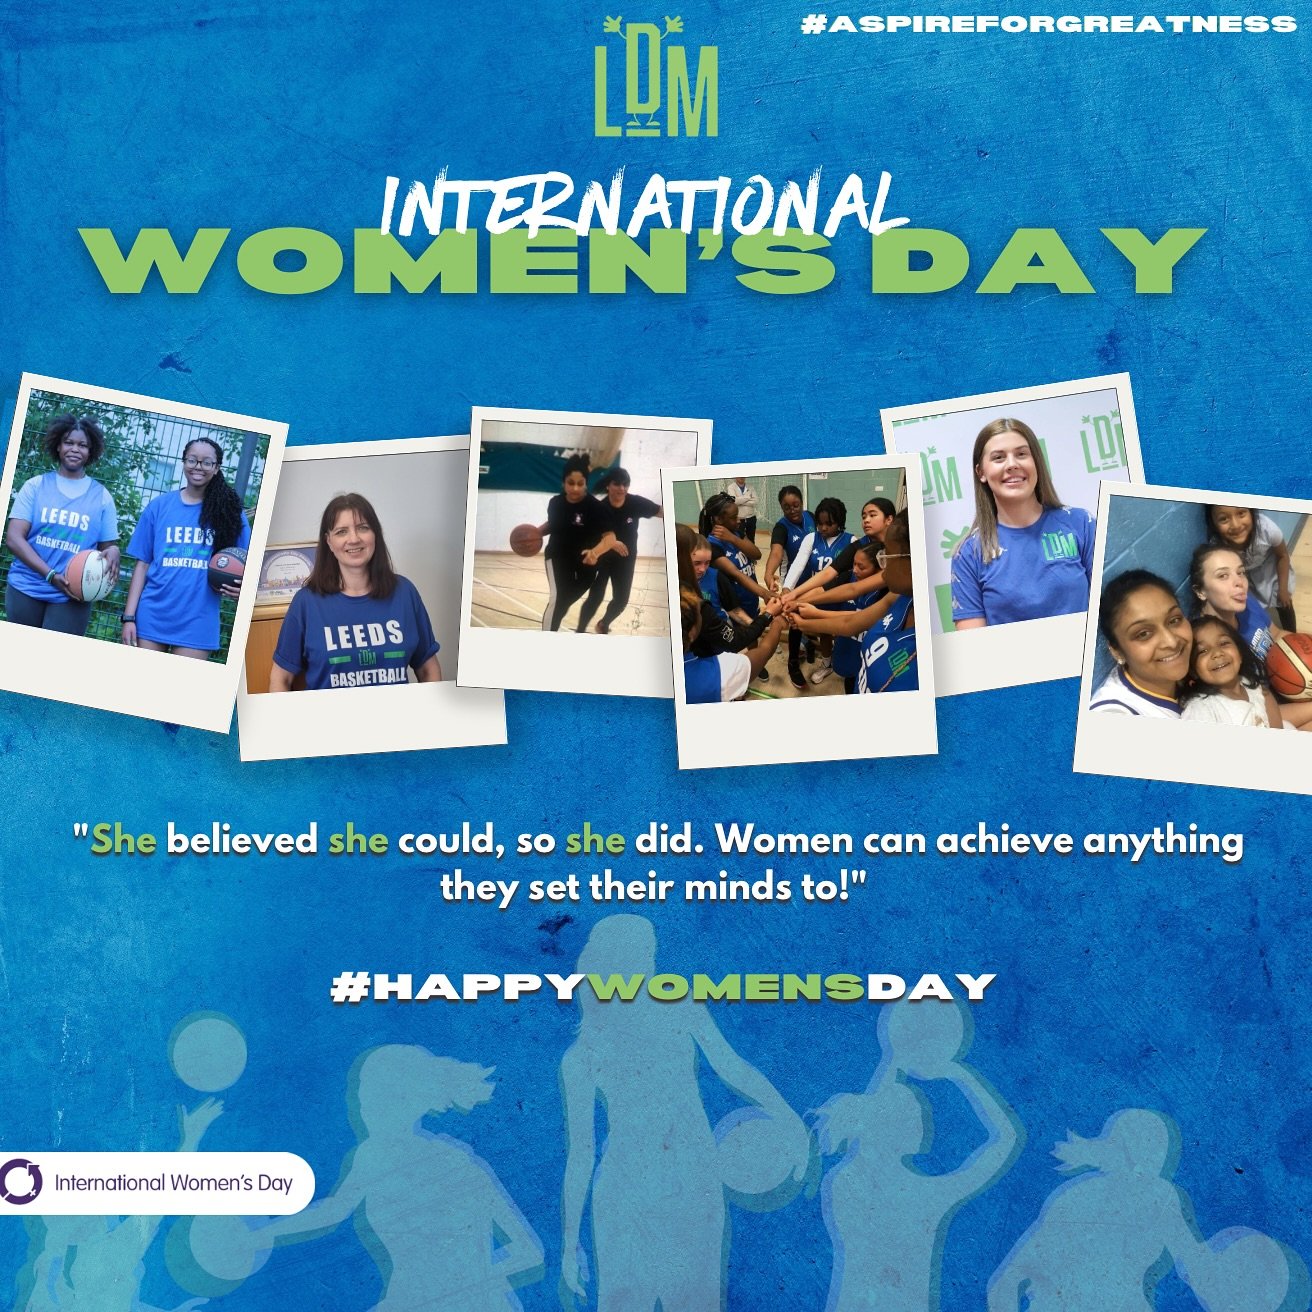 Happy Women&rsquo;s Day💙

Sending appreciation to all the incredible women in basketball on International Women&rsquo;s Day! LDM stands with you, celebrating your determination and hard work in building the game we love. Keep shining, inspiring, and